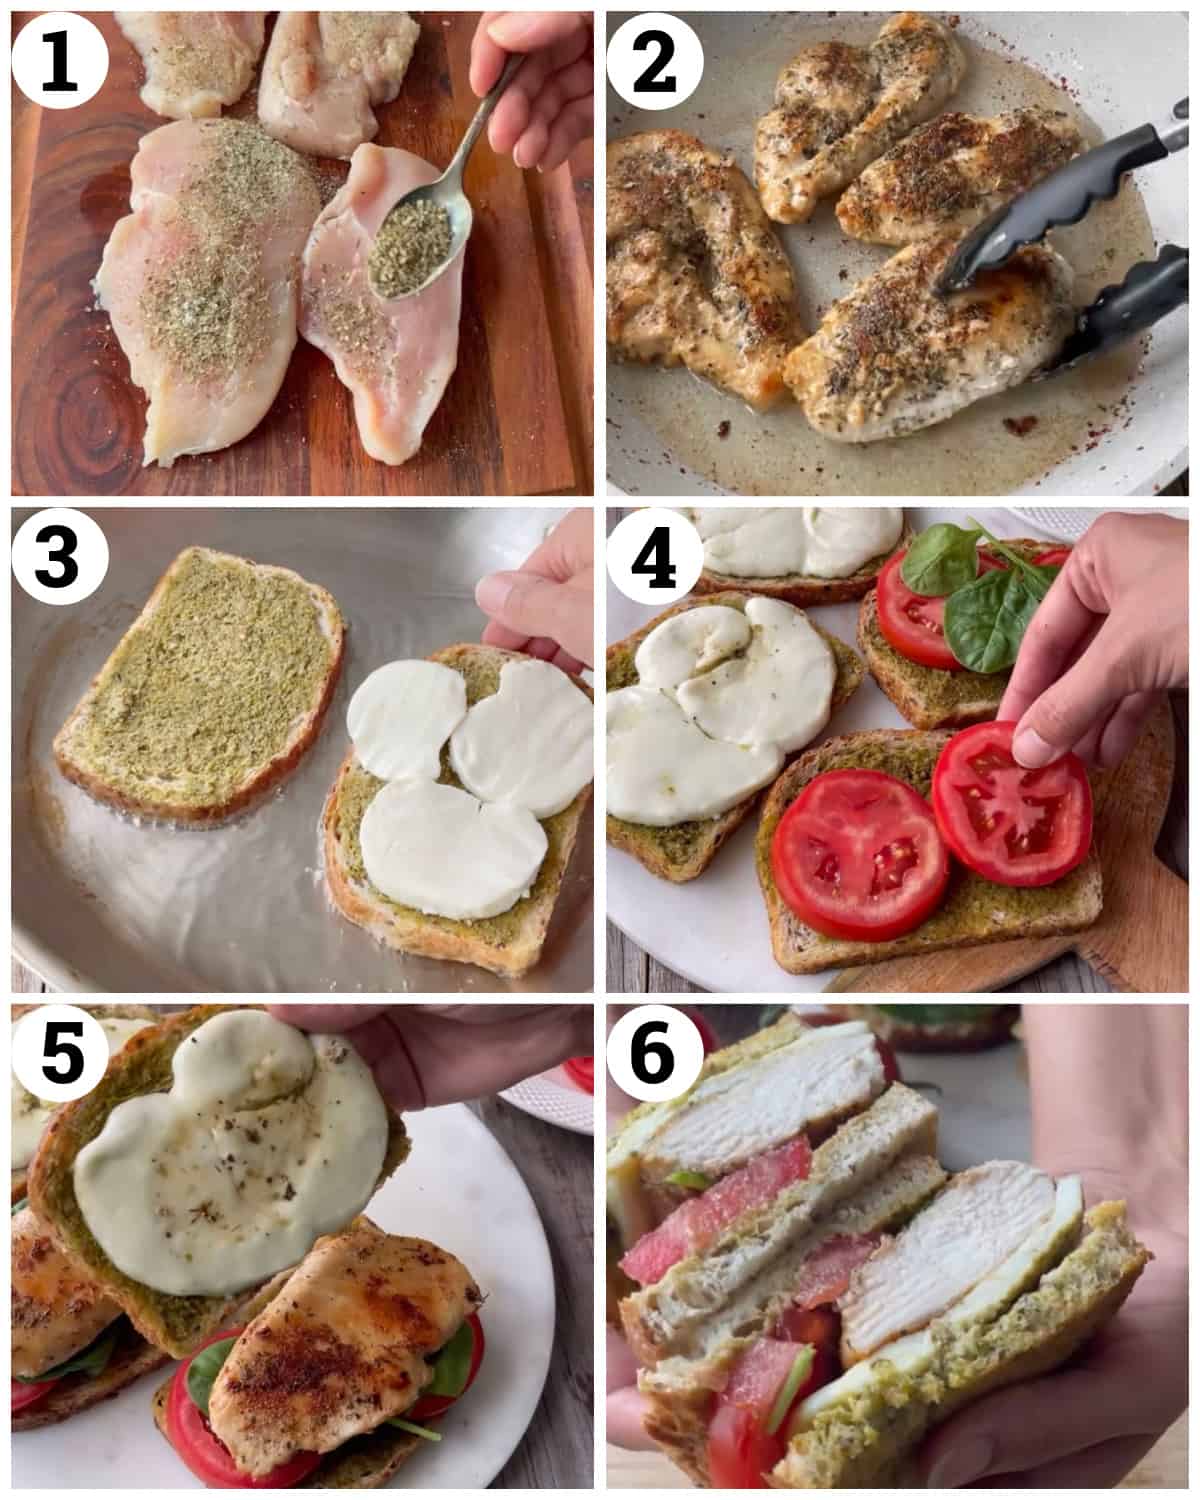 Season and sear the chicken breasts then spread pesto on both breads and top one with mozzarella. Sear until cheese is melted then top with the tomatoes and chicken. Close up and slice the sandwich. 